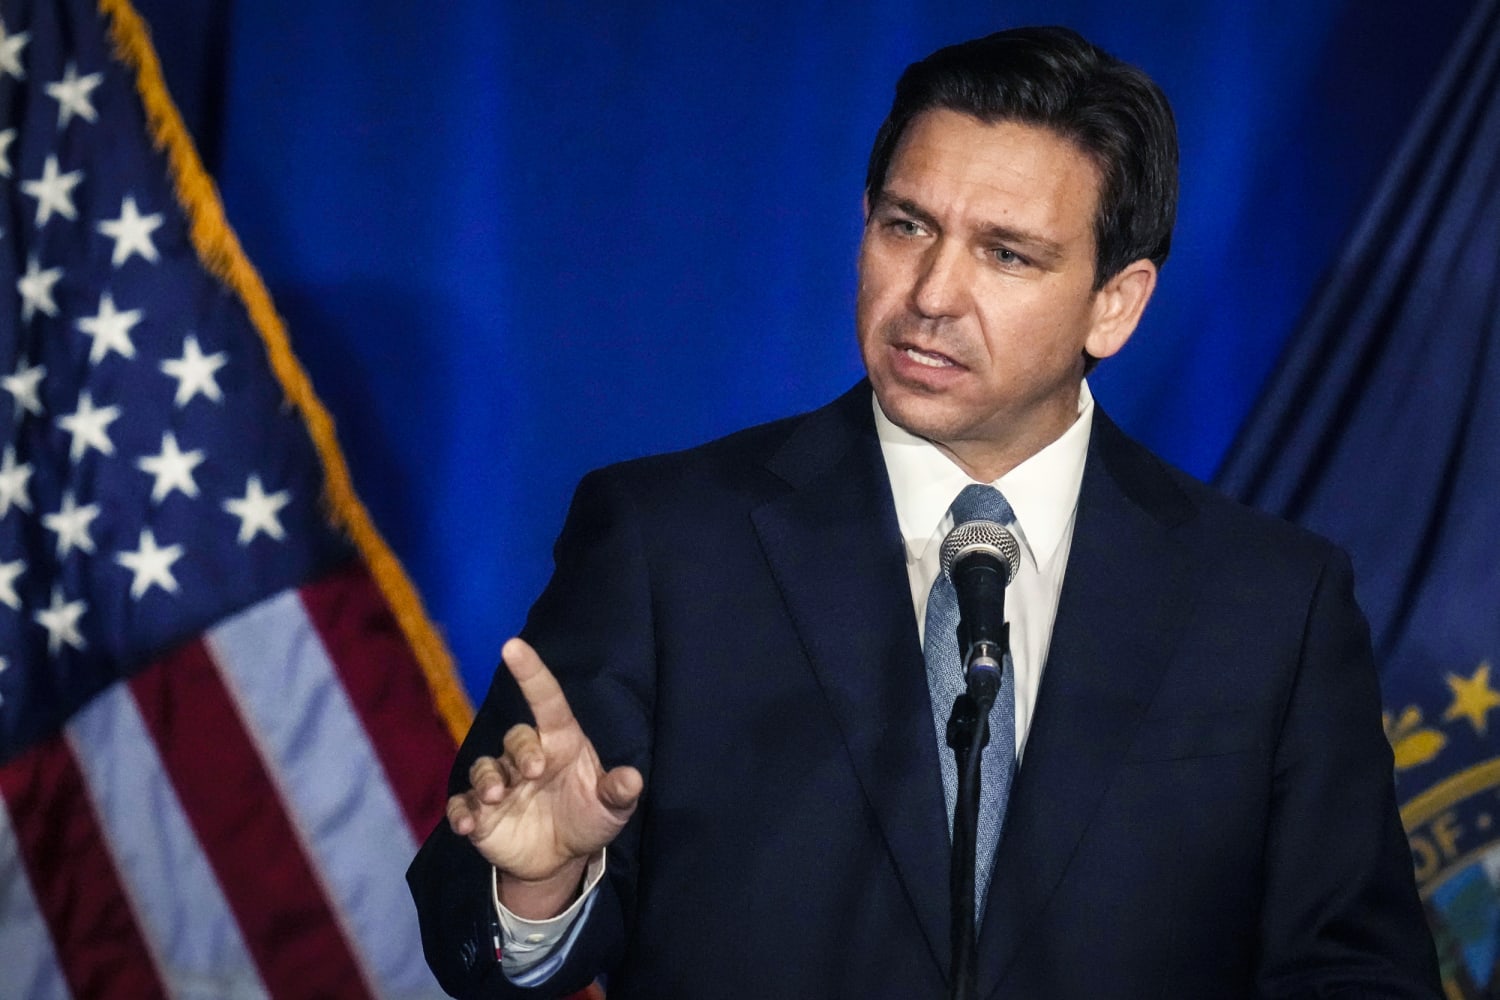 Ron DeSantis attacks Trump on immigration: ‘This is a different guy’ than in 2016